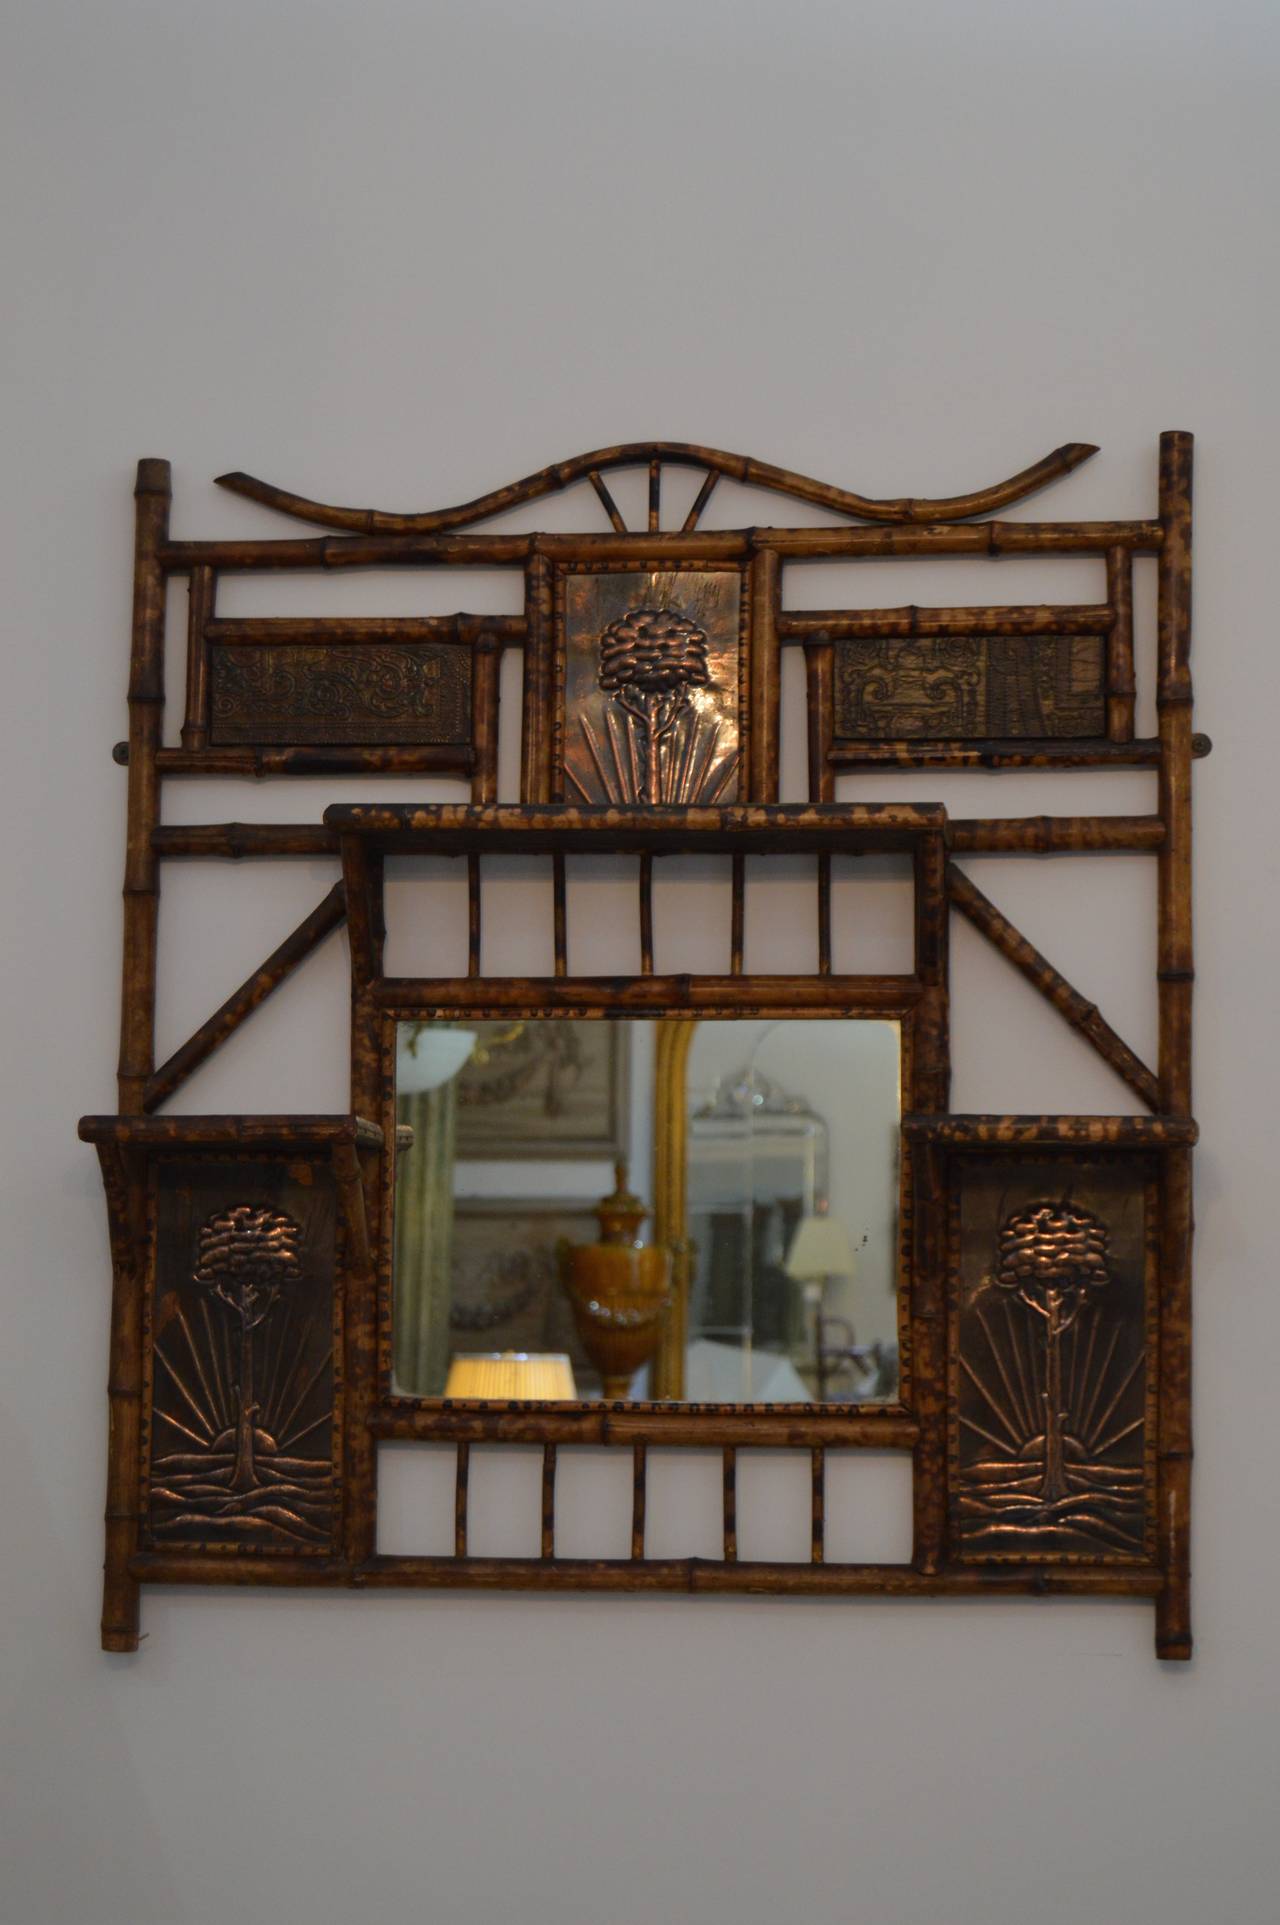 19th Century Antique English Tortoise-Bamboo Mirror and Shelf with Copper Decor